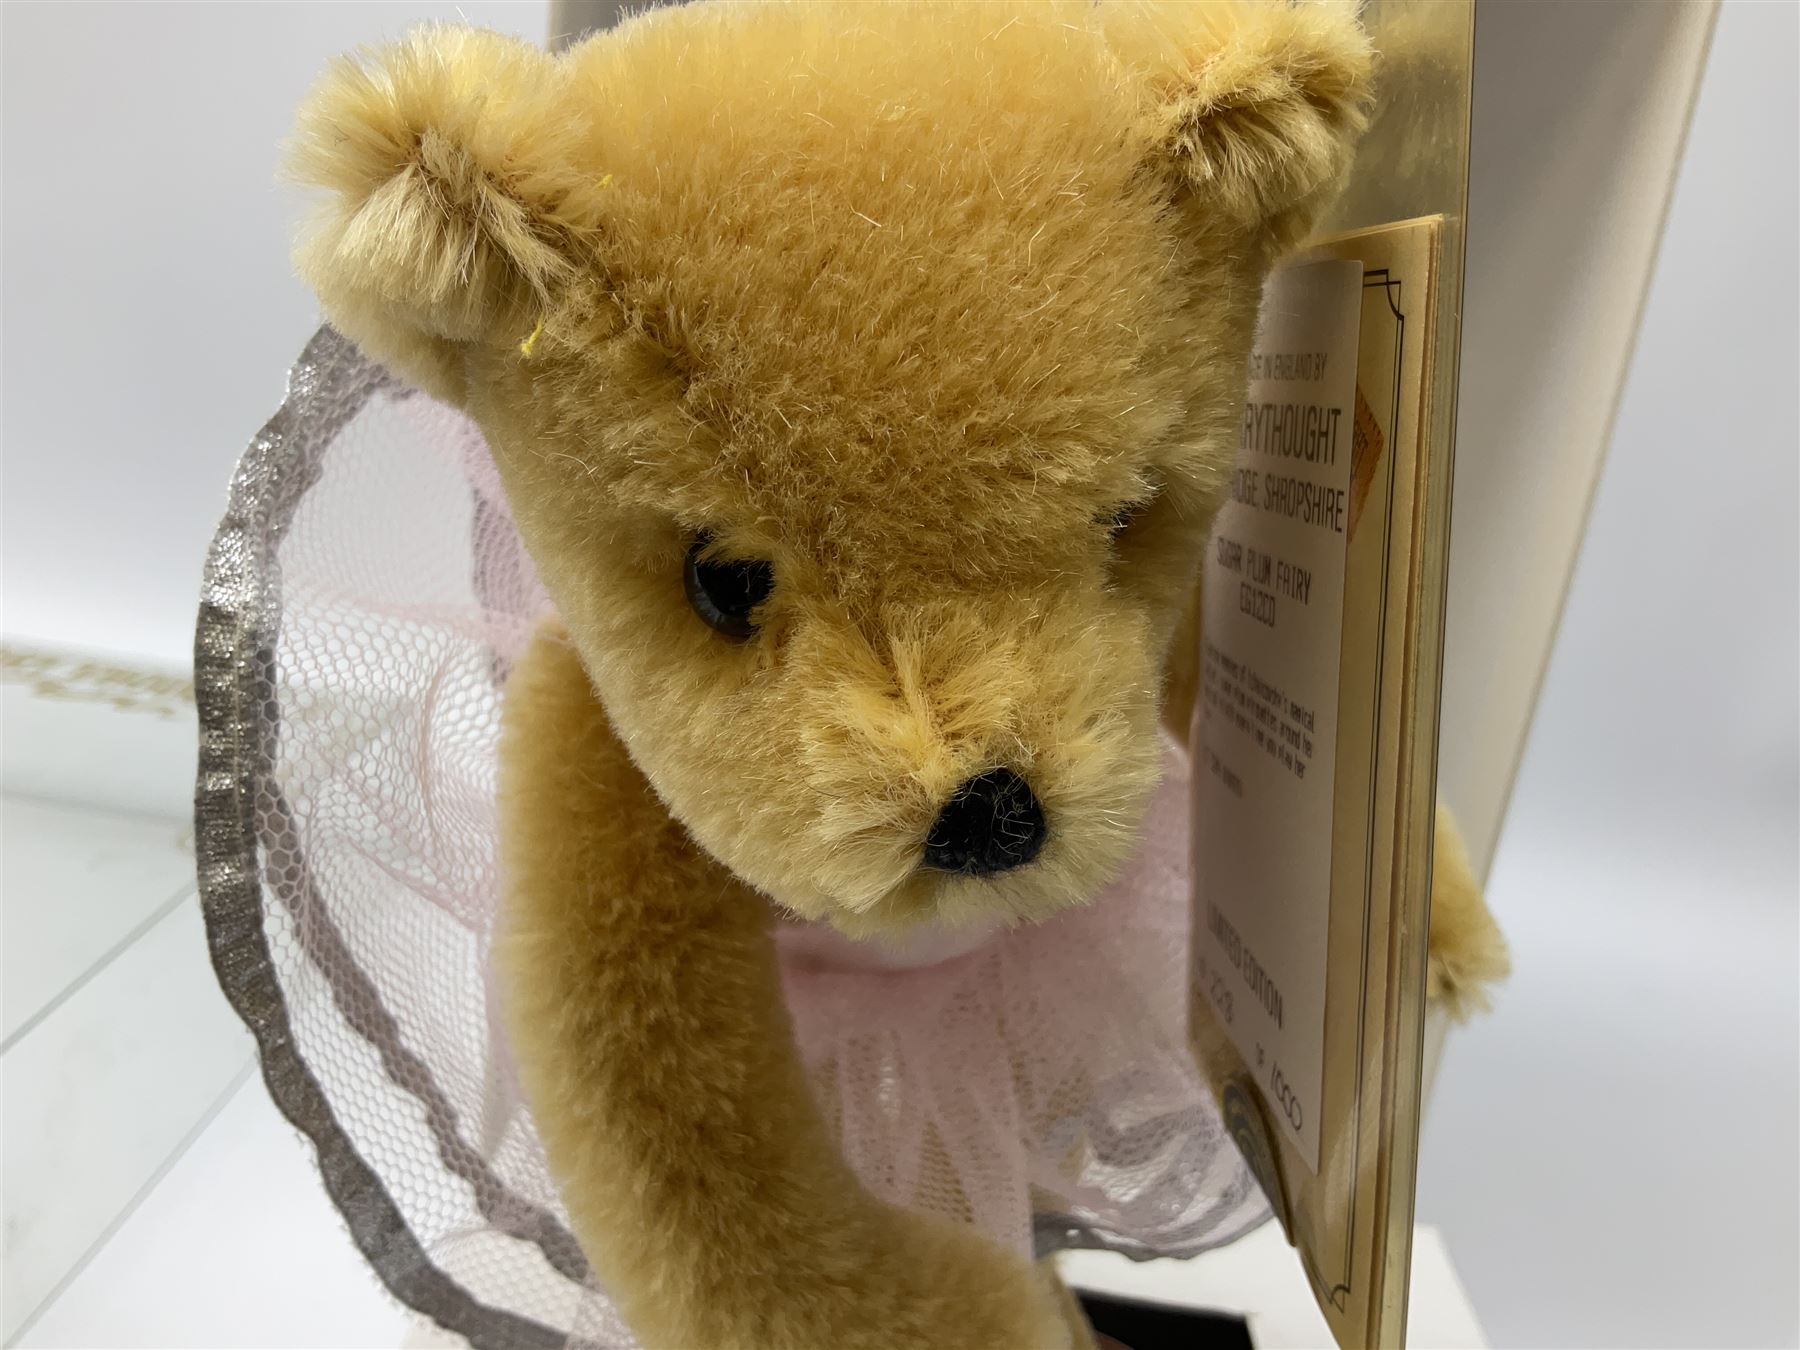 Limited edition Merrythought musical bear - Image 2 of 7